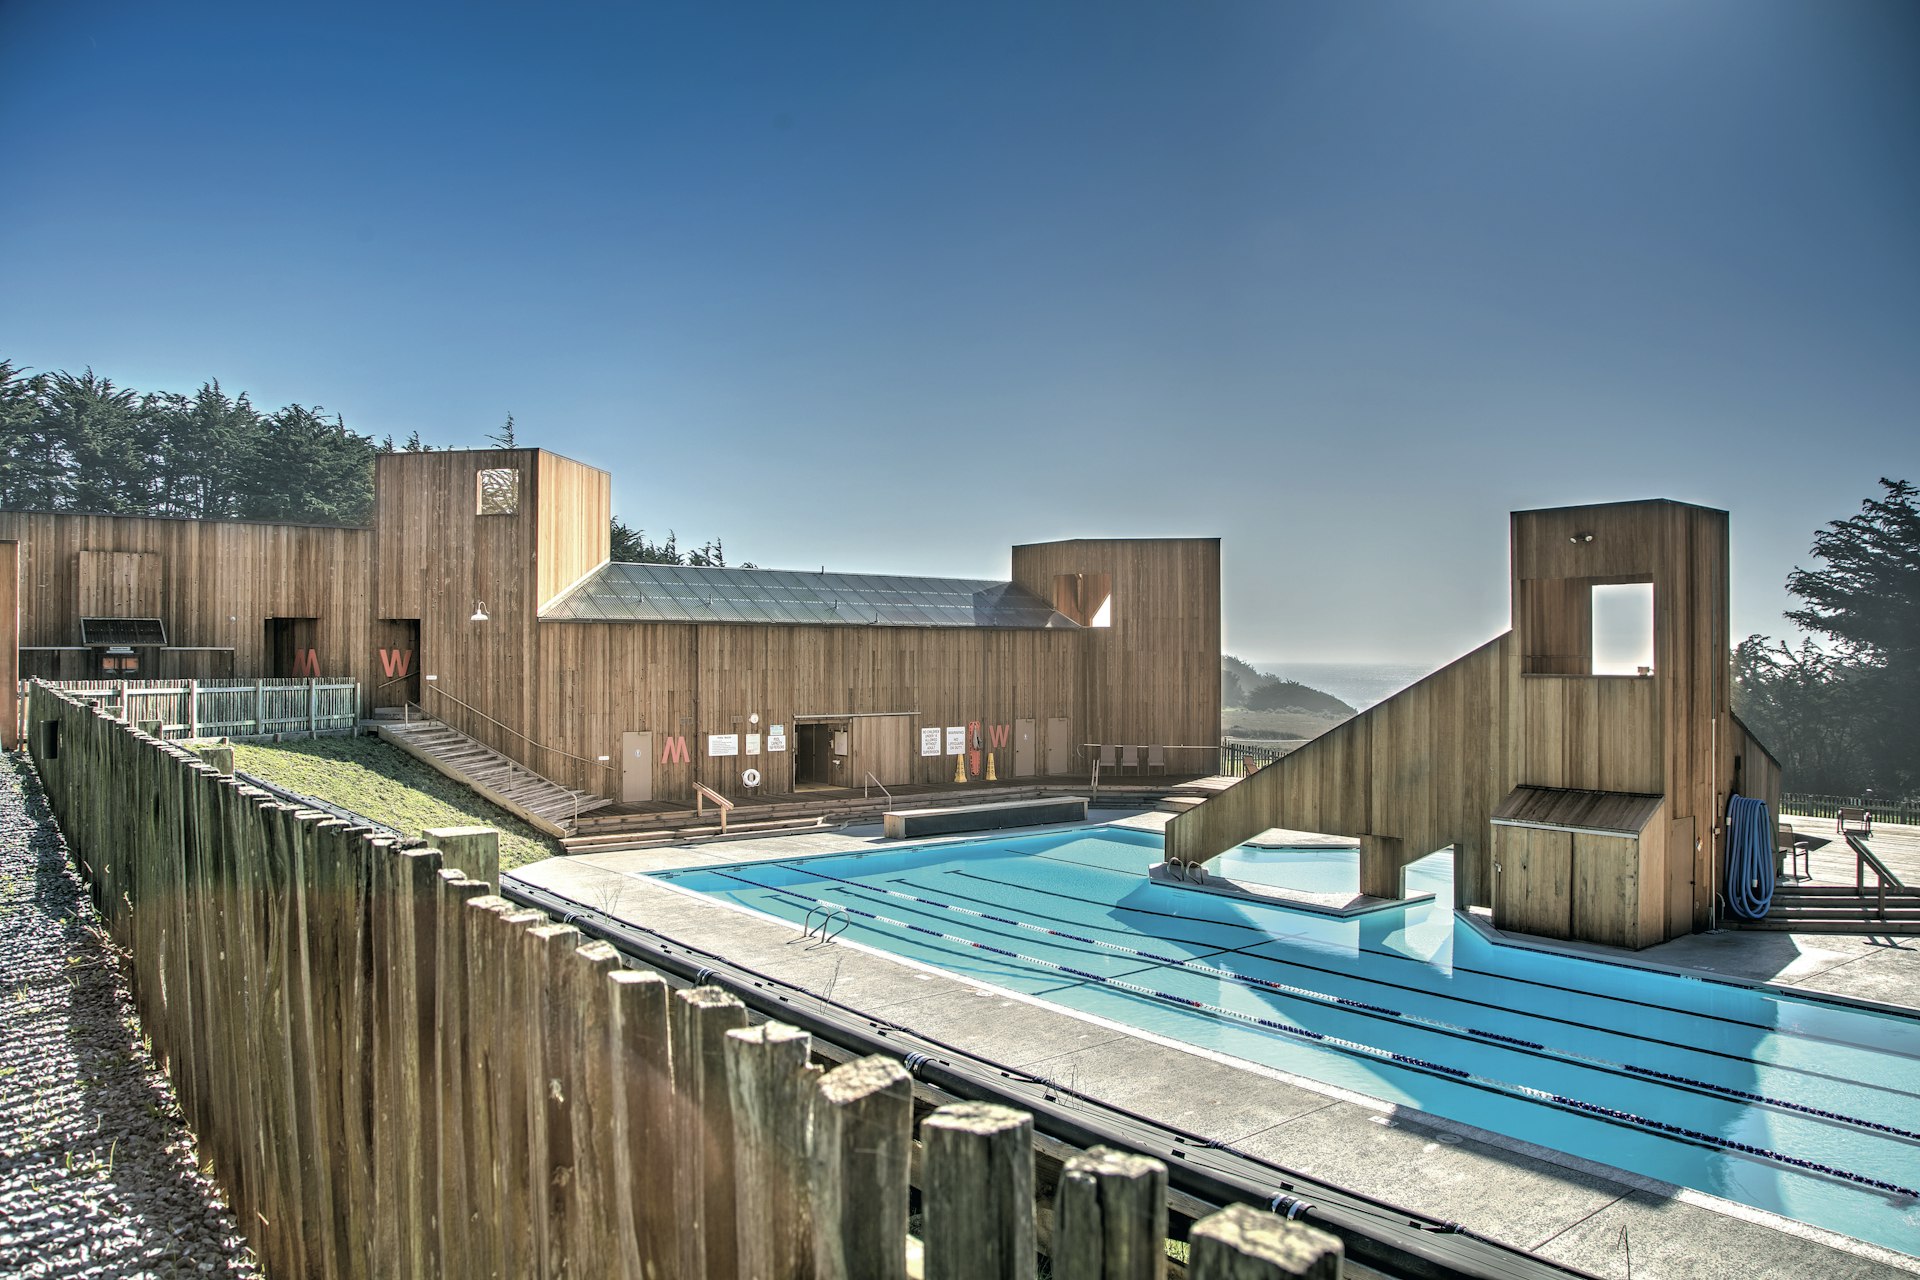 A rooftop pool with a modern wooden building to one side, and a view to the distant ocean on the other